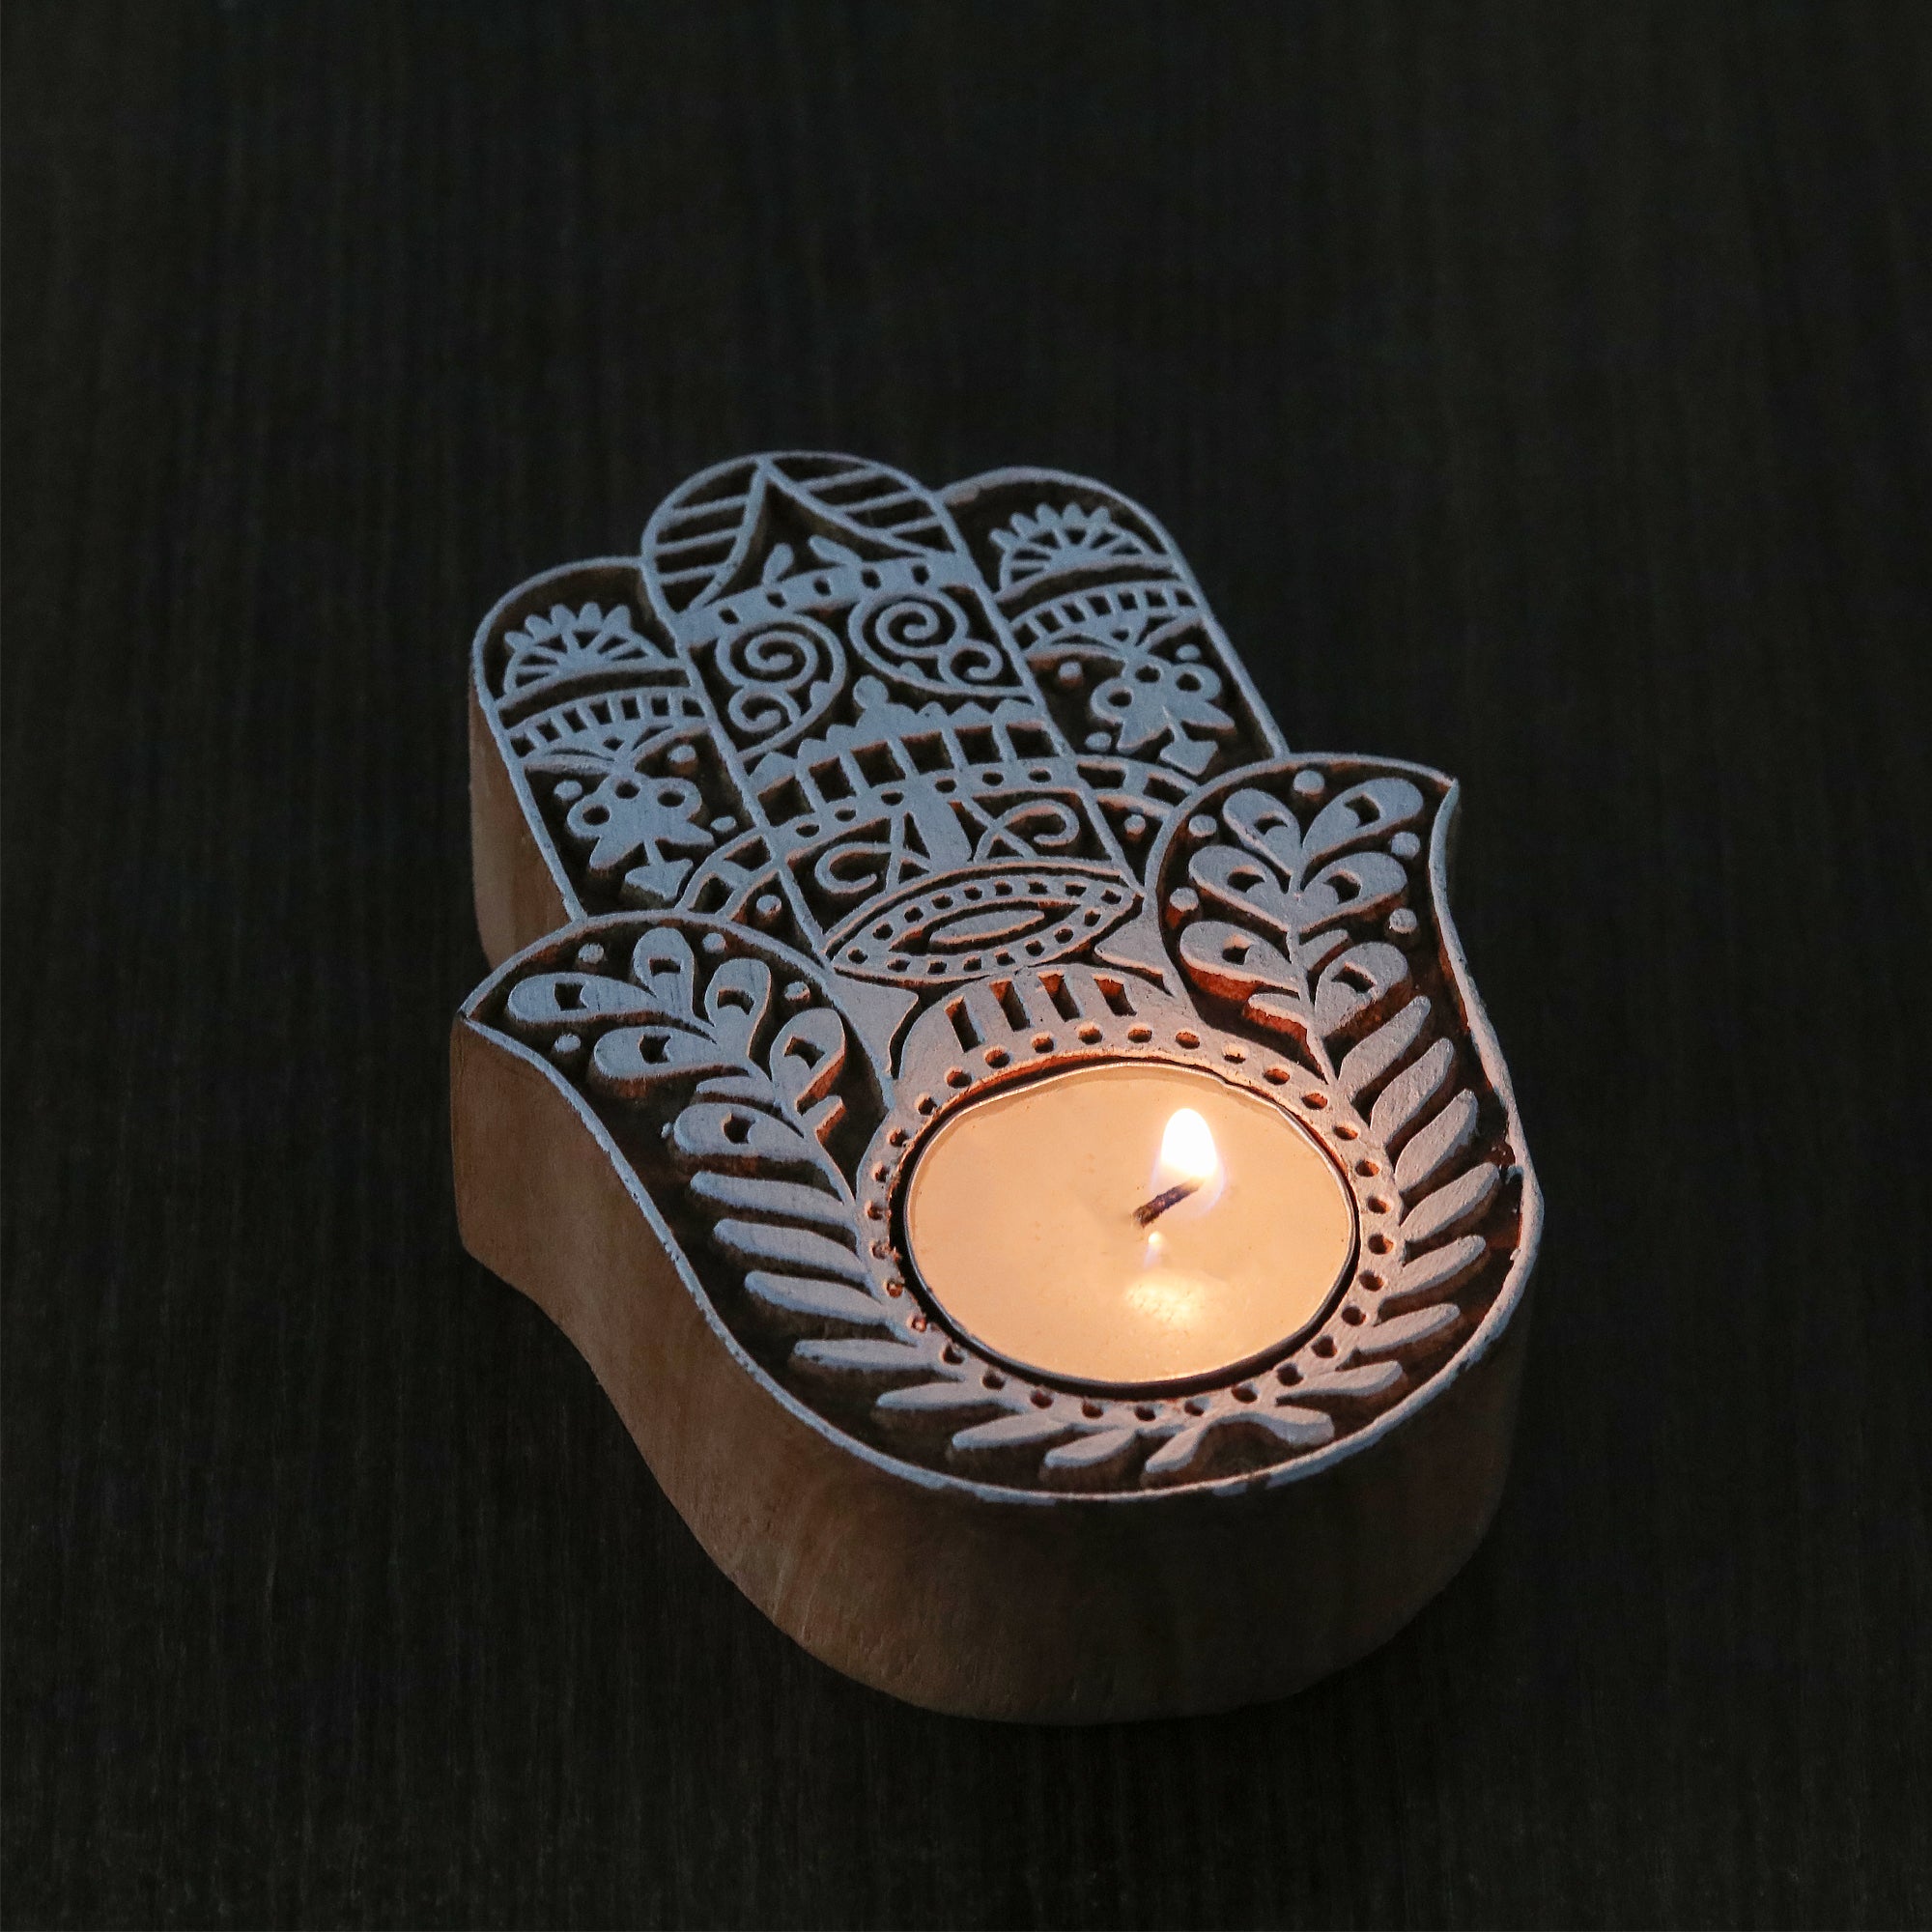 Wooden Printing Block & Candle Holder- Ornate Hand